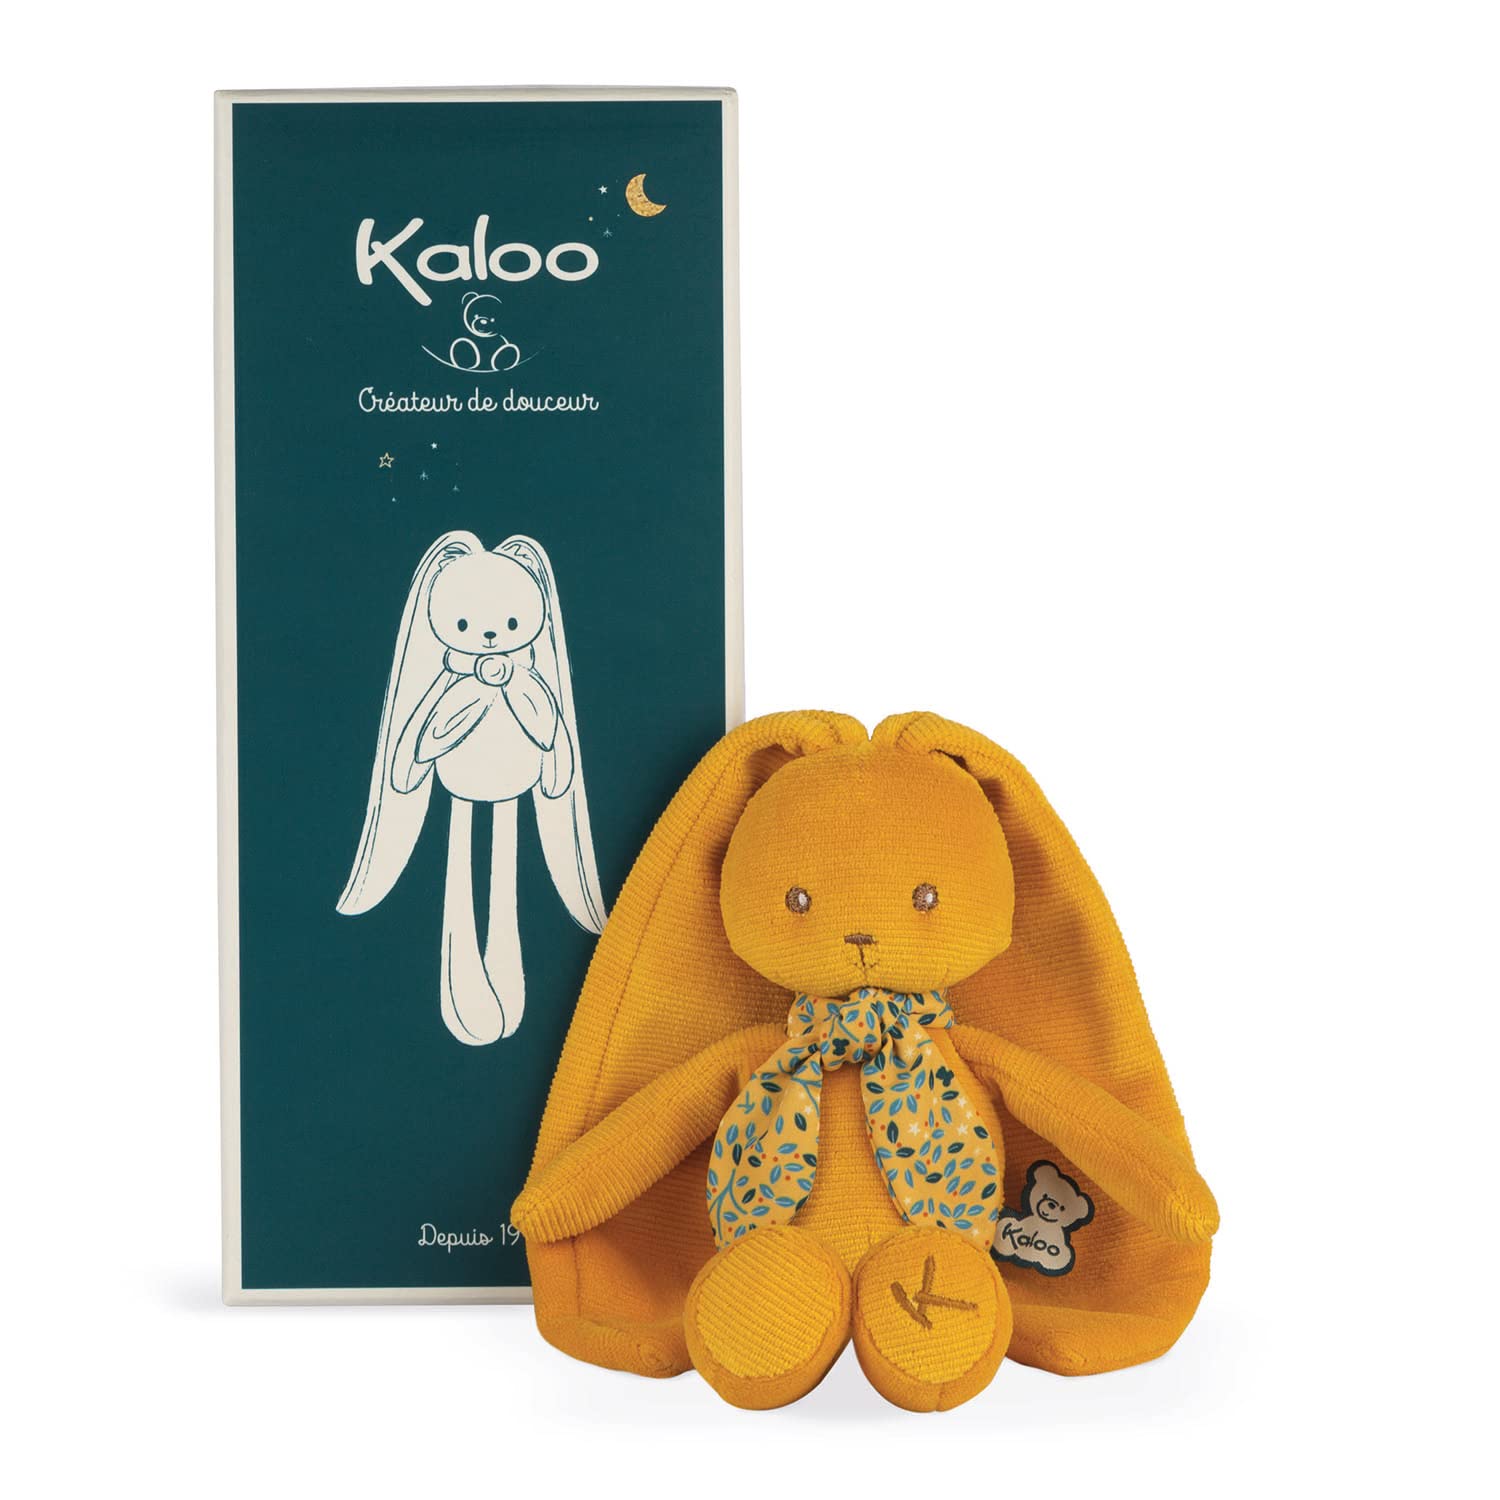 Kaloo Lapinoo My First Friend Corduroy Rabbit - Machine Washable - 10? Tall in Gift Box - Ochre Yellow - Ages 0+ - K969943